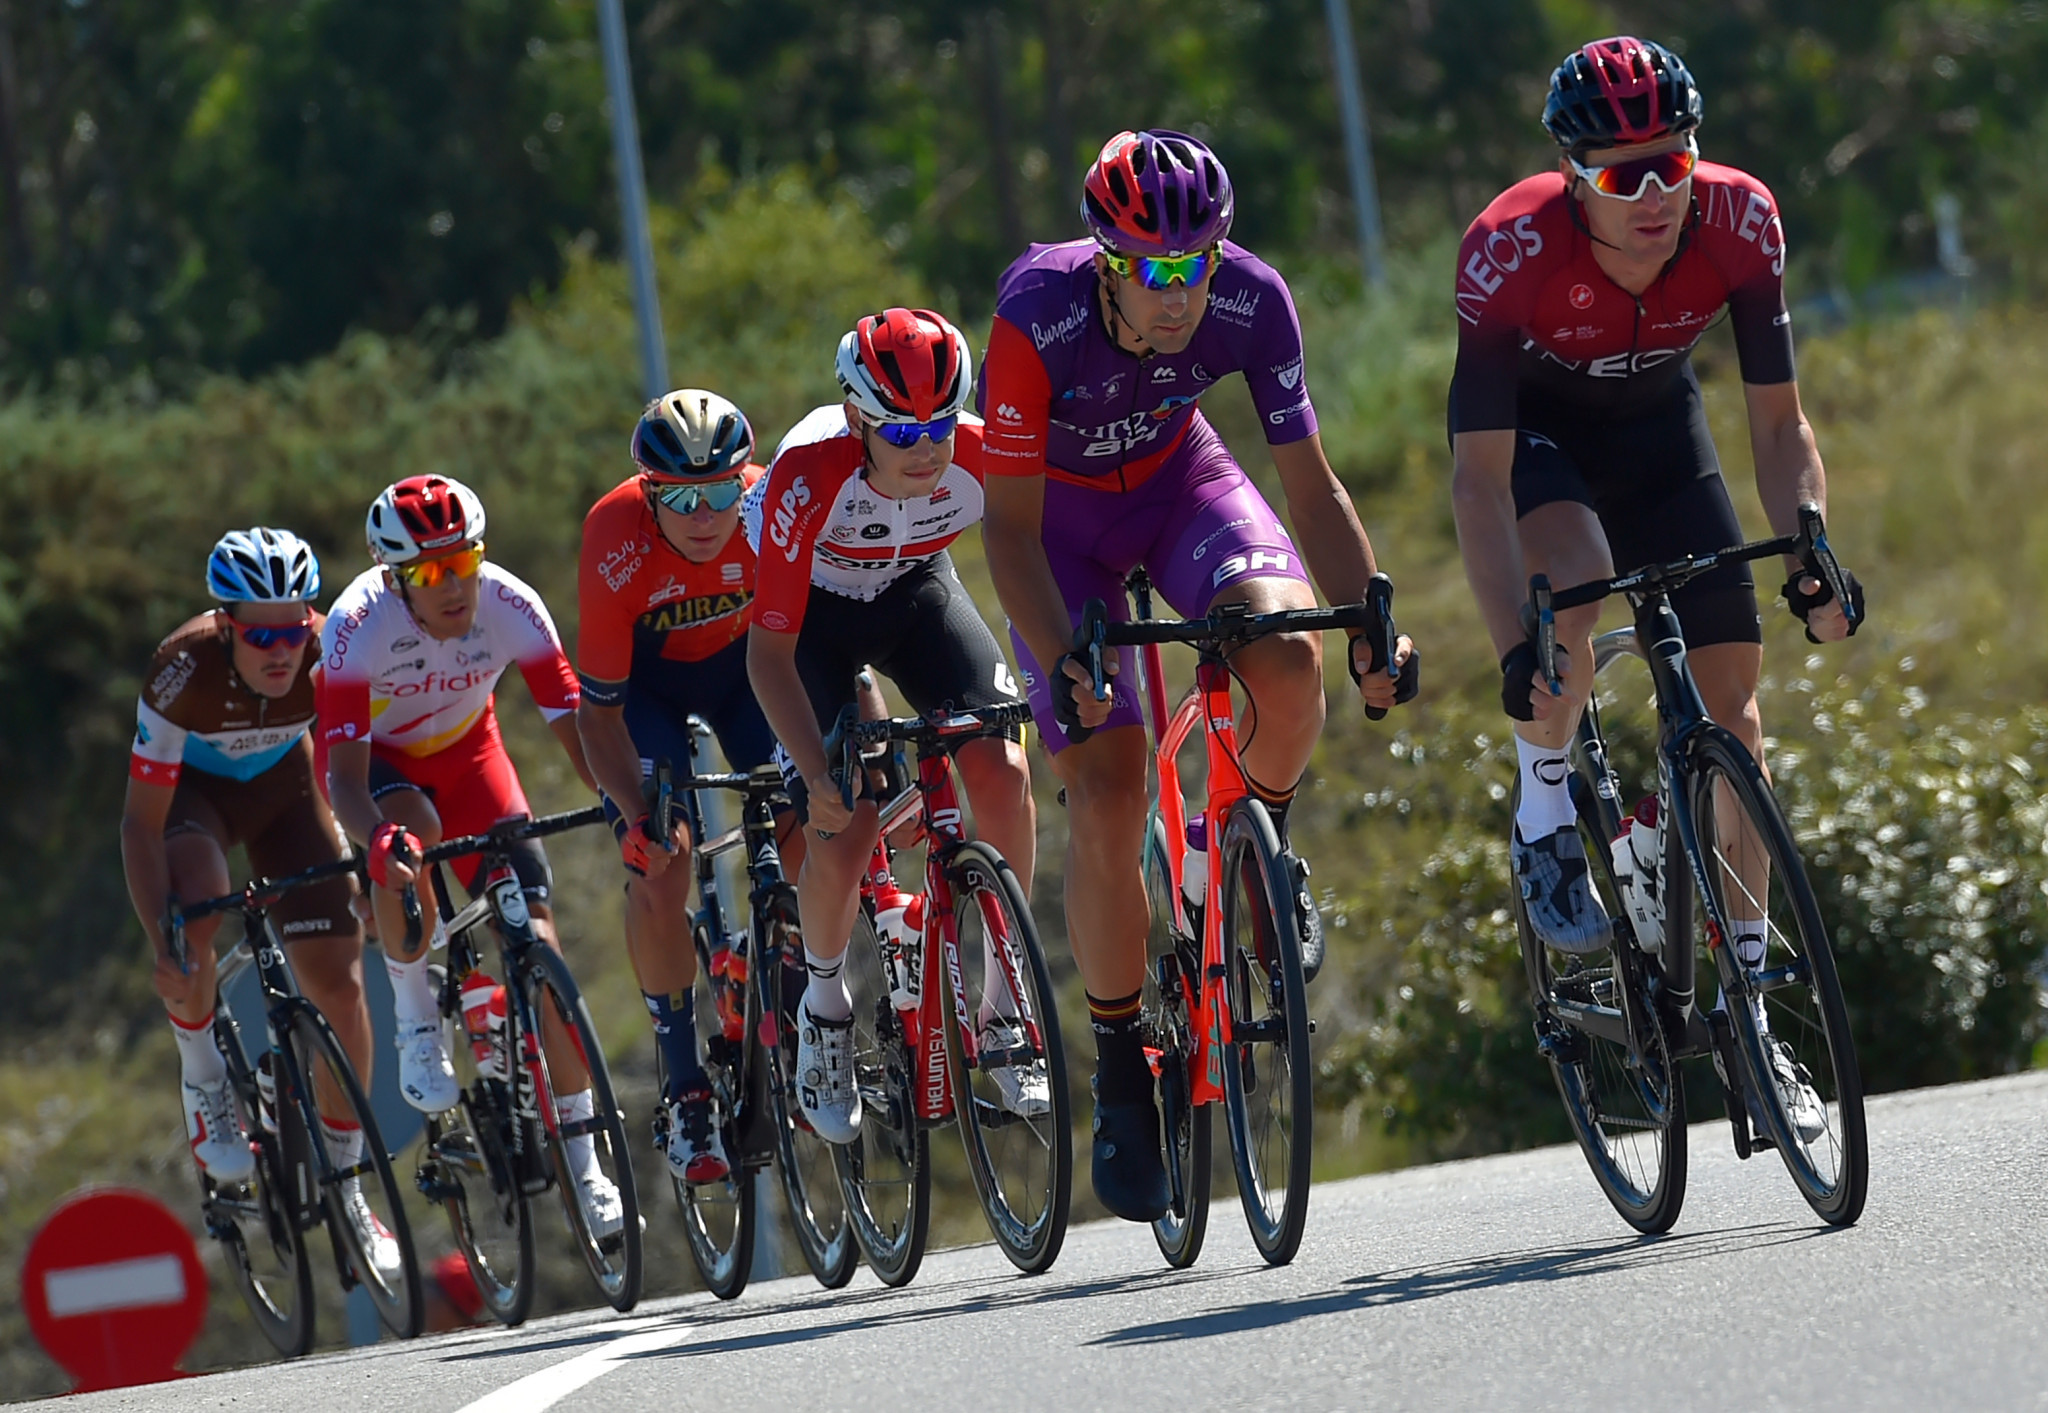 This year's Vuelta a España will not enter Portugal ©Getty Images